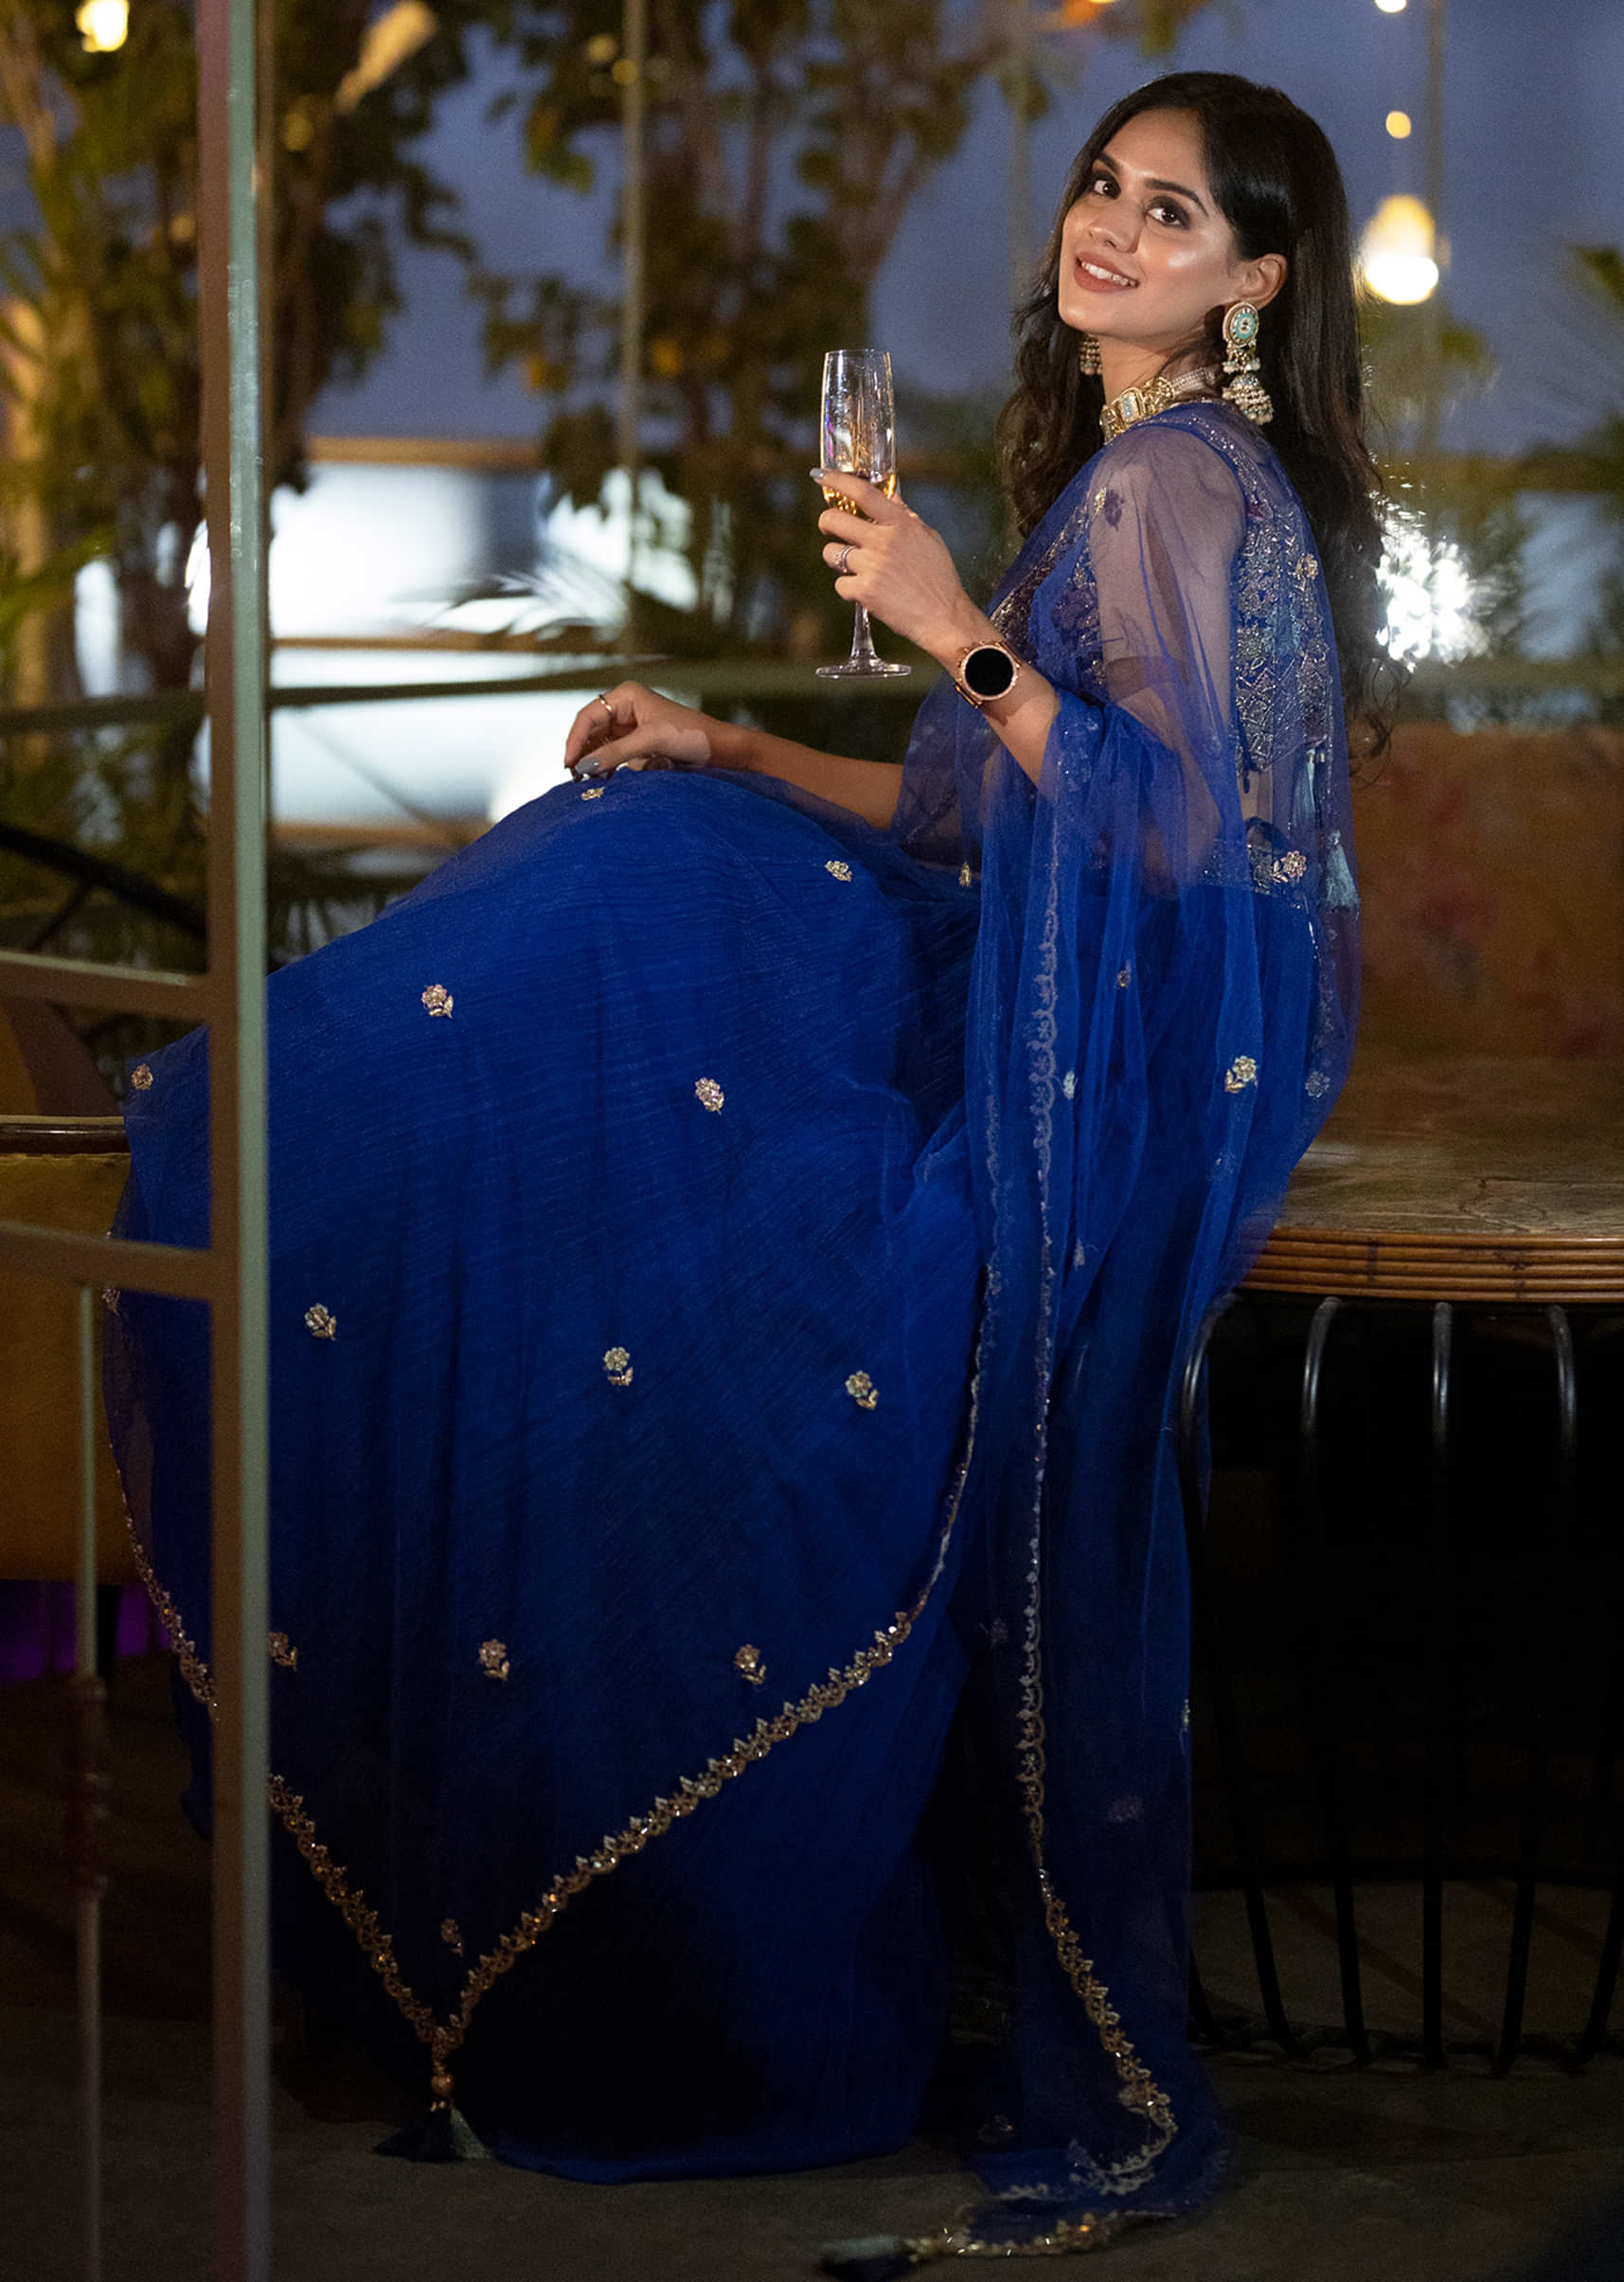 Pooja Mundhra In Kalki Royal Blue Gathered Skirt And Crop Top With Embossed Hand Embroidery In Floral Motifs